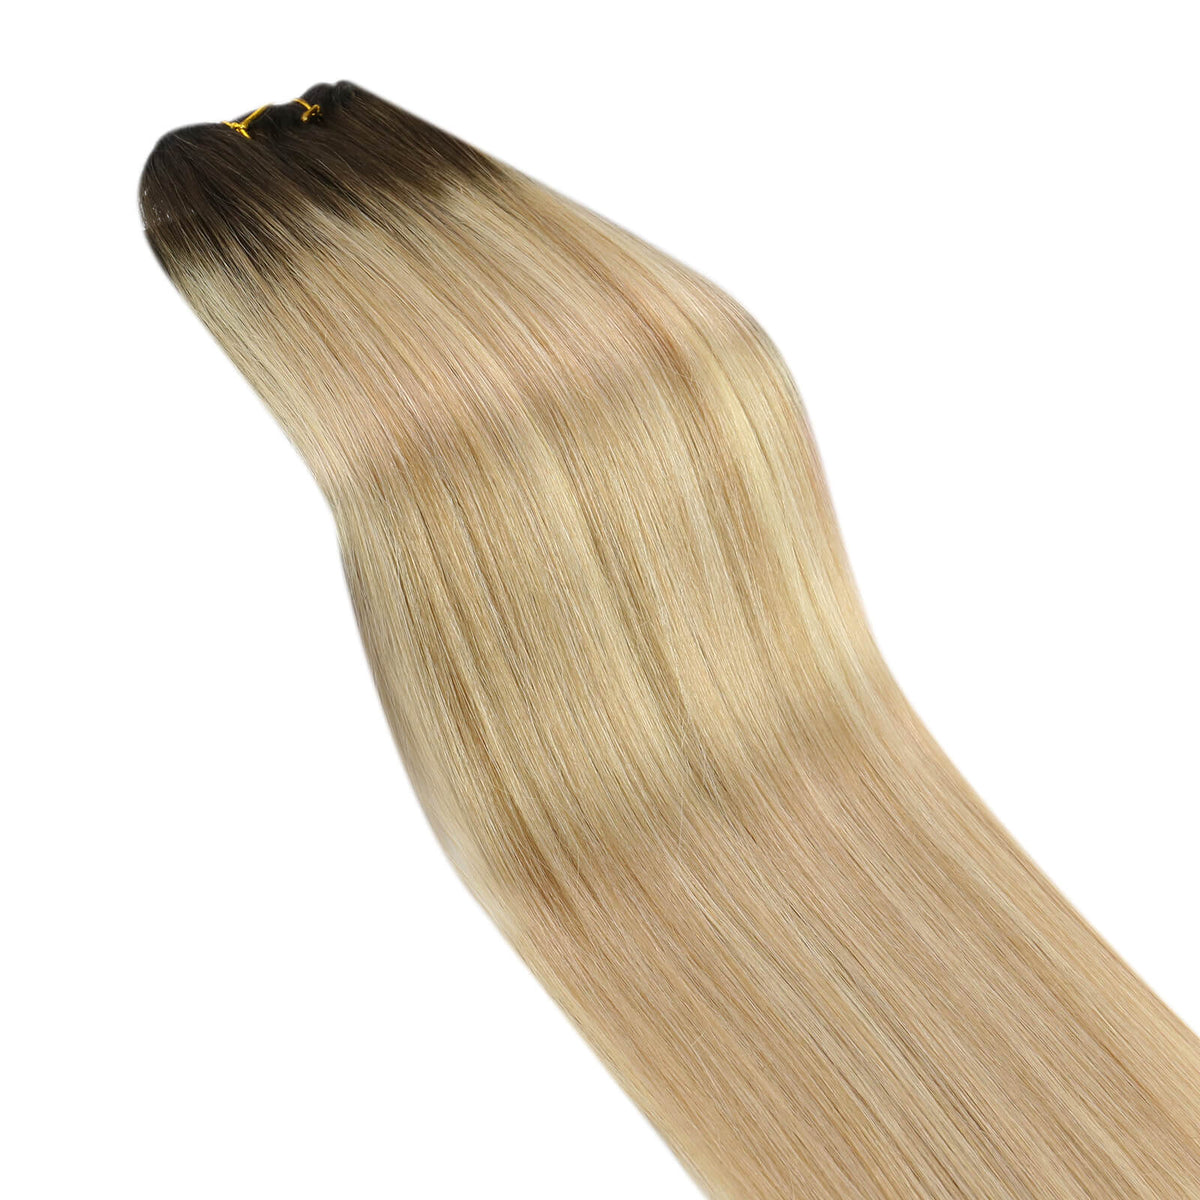 Hair Bundle Human Hair Remy Hair High Quality Ombre Brown with Blonde #3/8/22